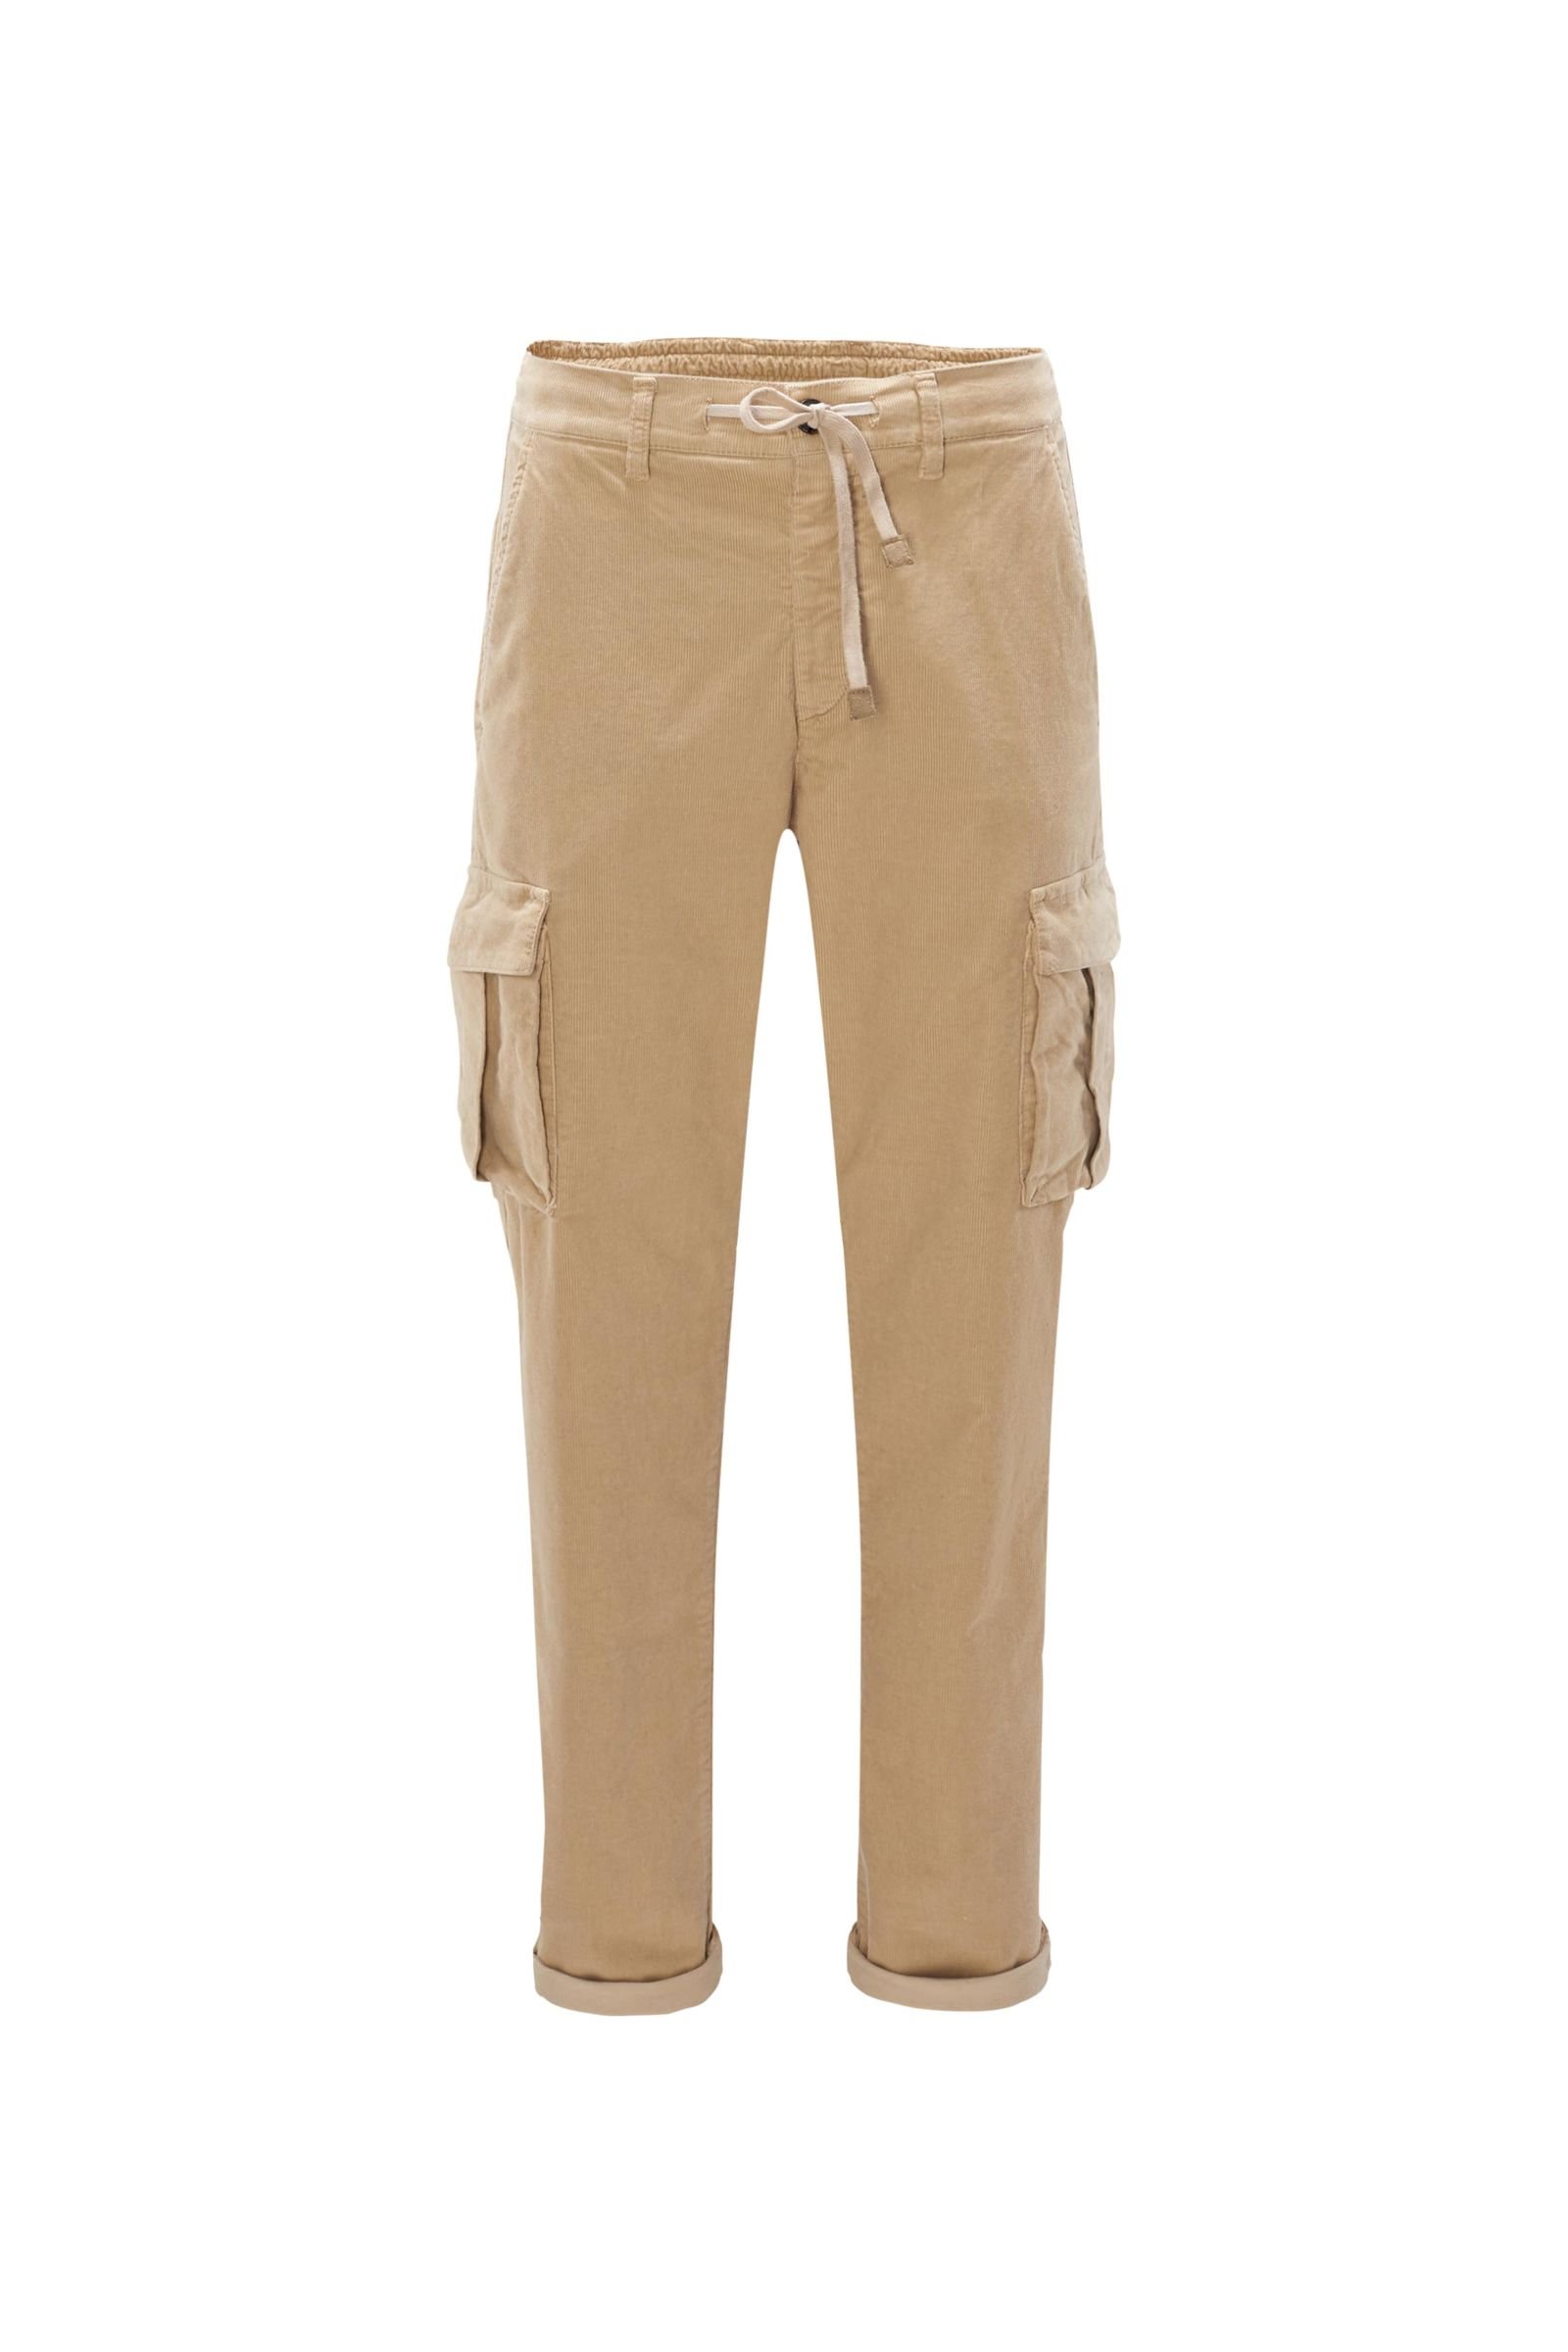 ALPHA INDUSTRIES Slim fit Cargo Pants 'Spy' in Sepia, Light Brown | ABOUT  YOU